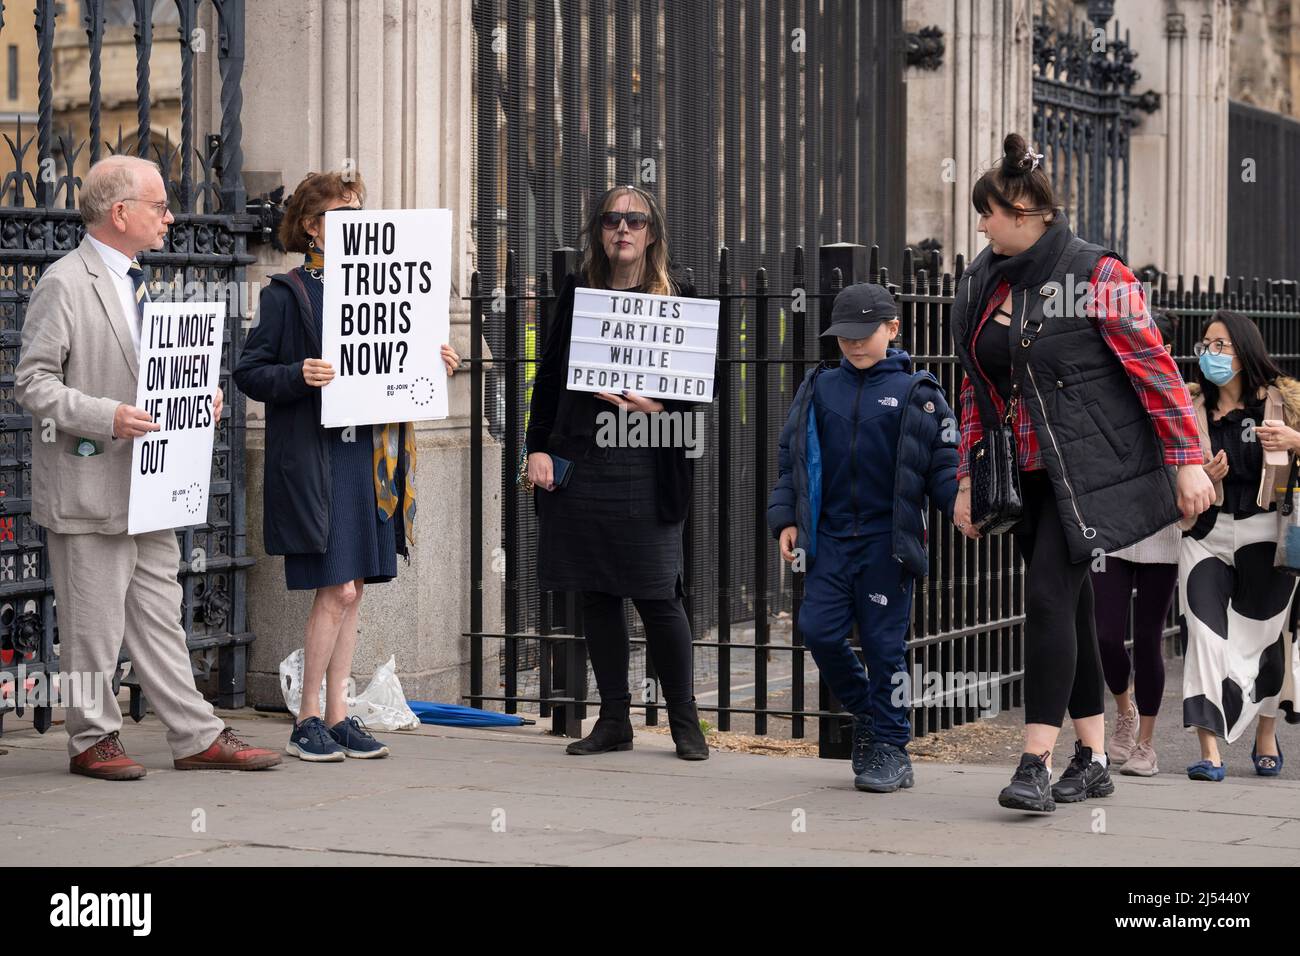 On the day that Prime Minister Boris Johnson apologised to parliament about his fixed-penalty fine for being present at a party during his own Covid pandemic restrictions, protesters hold placards at the gates of parliament, on 19th April 2022, in London, England. The Met police continue to investigate Johnson and his staff as news of more lockdown party fines are expected to be revealed by police. Stock Photo